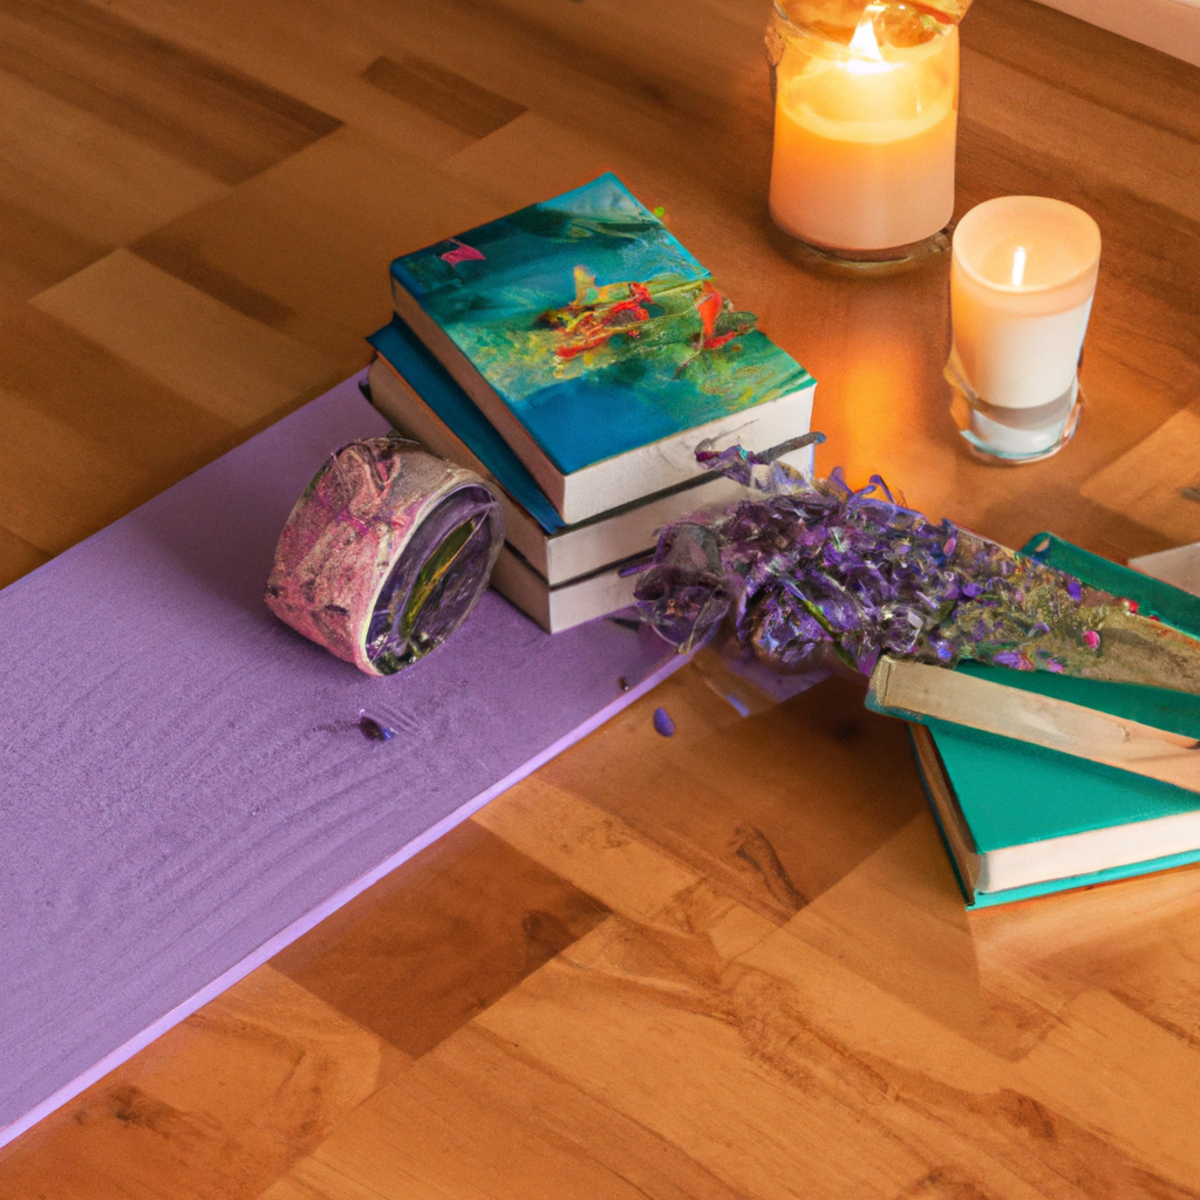 Yoga mat with meditation cushion, books, candle, flowers, and more. A calming scene promoting relaxation and stress relief.